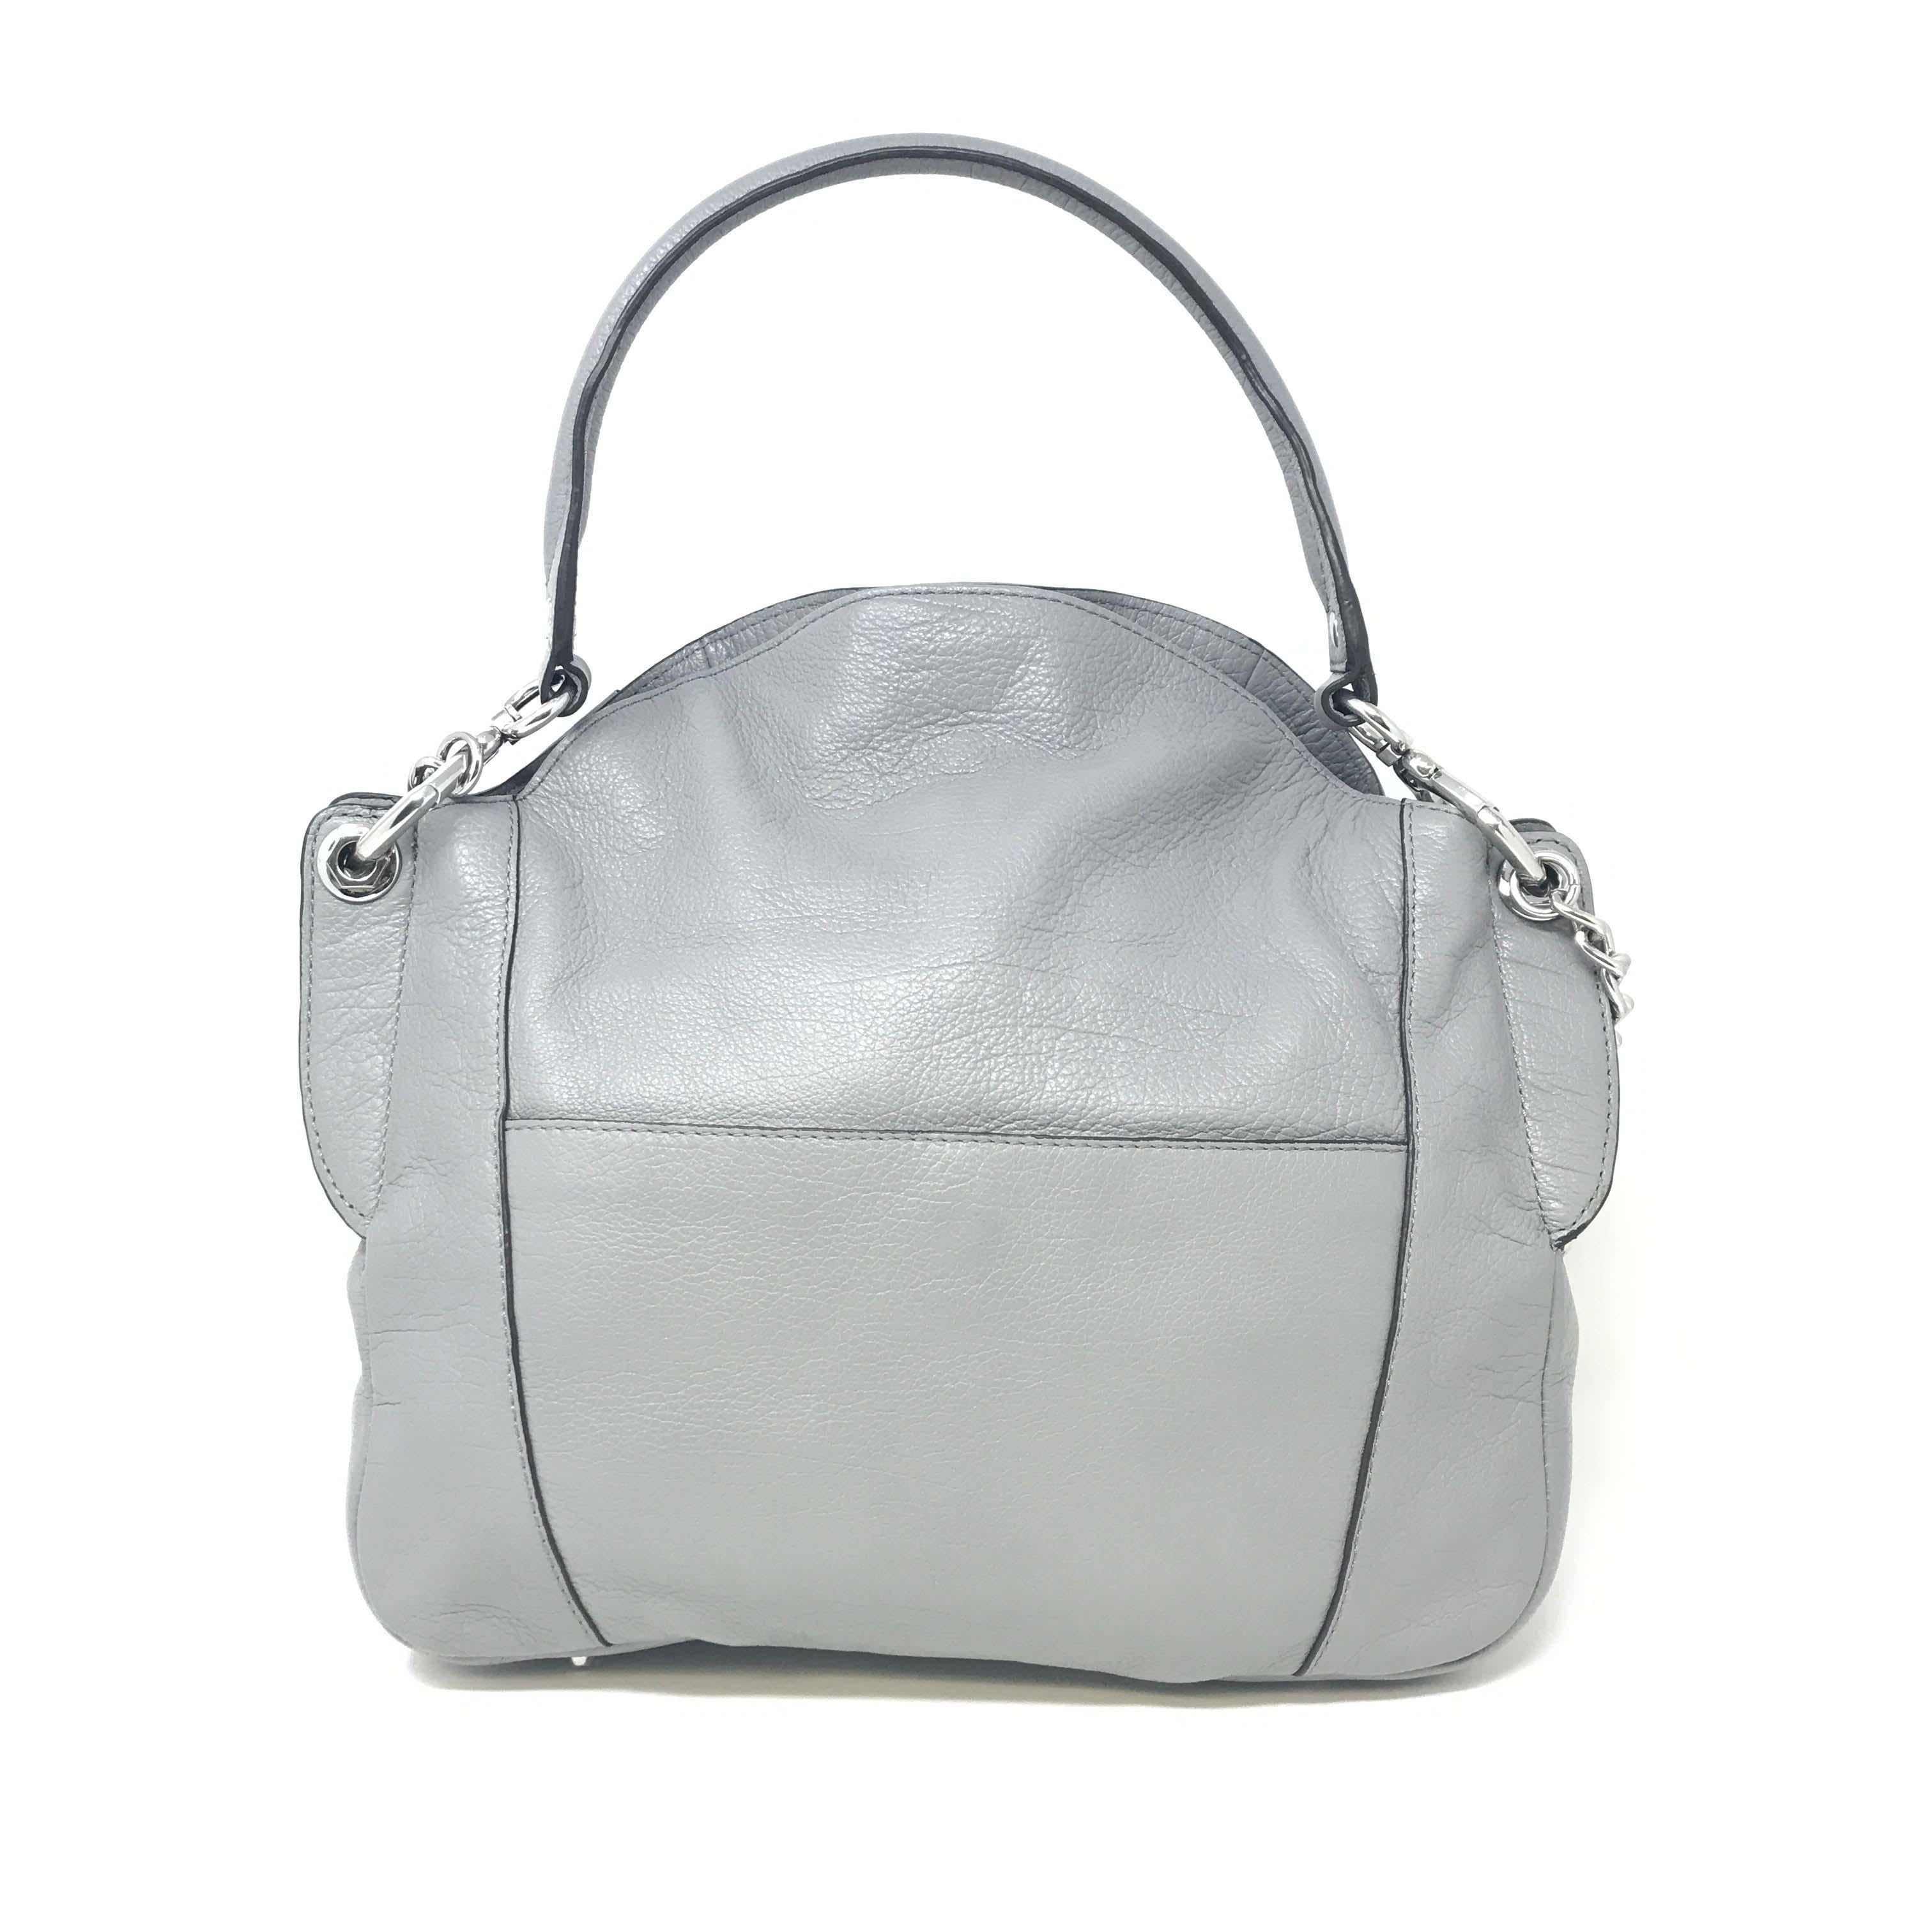 This 100% authentic orYANY Danielle A26581706 Italian Leather Convertible Grey Ladie's Shoulder Bag is a new and does not come with box and papers. It's in excellent condition.
Details:
Brand	orYANY
Strap